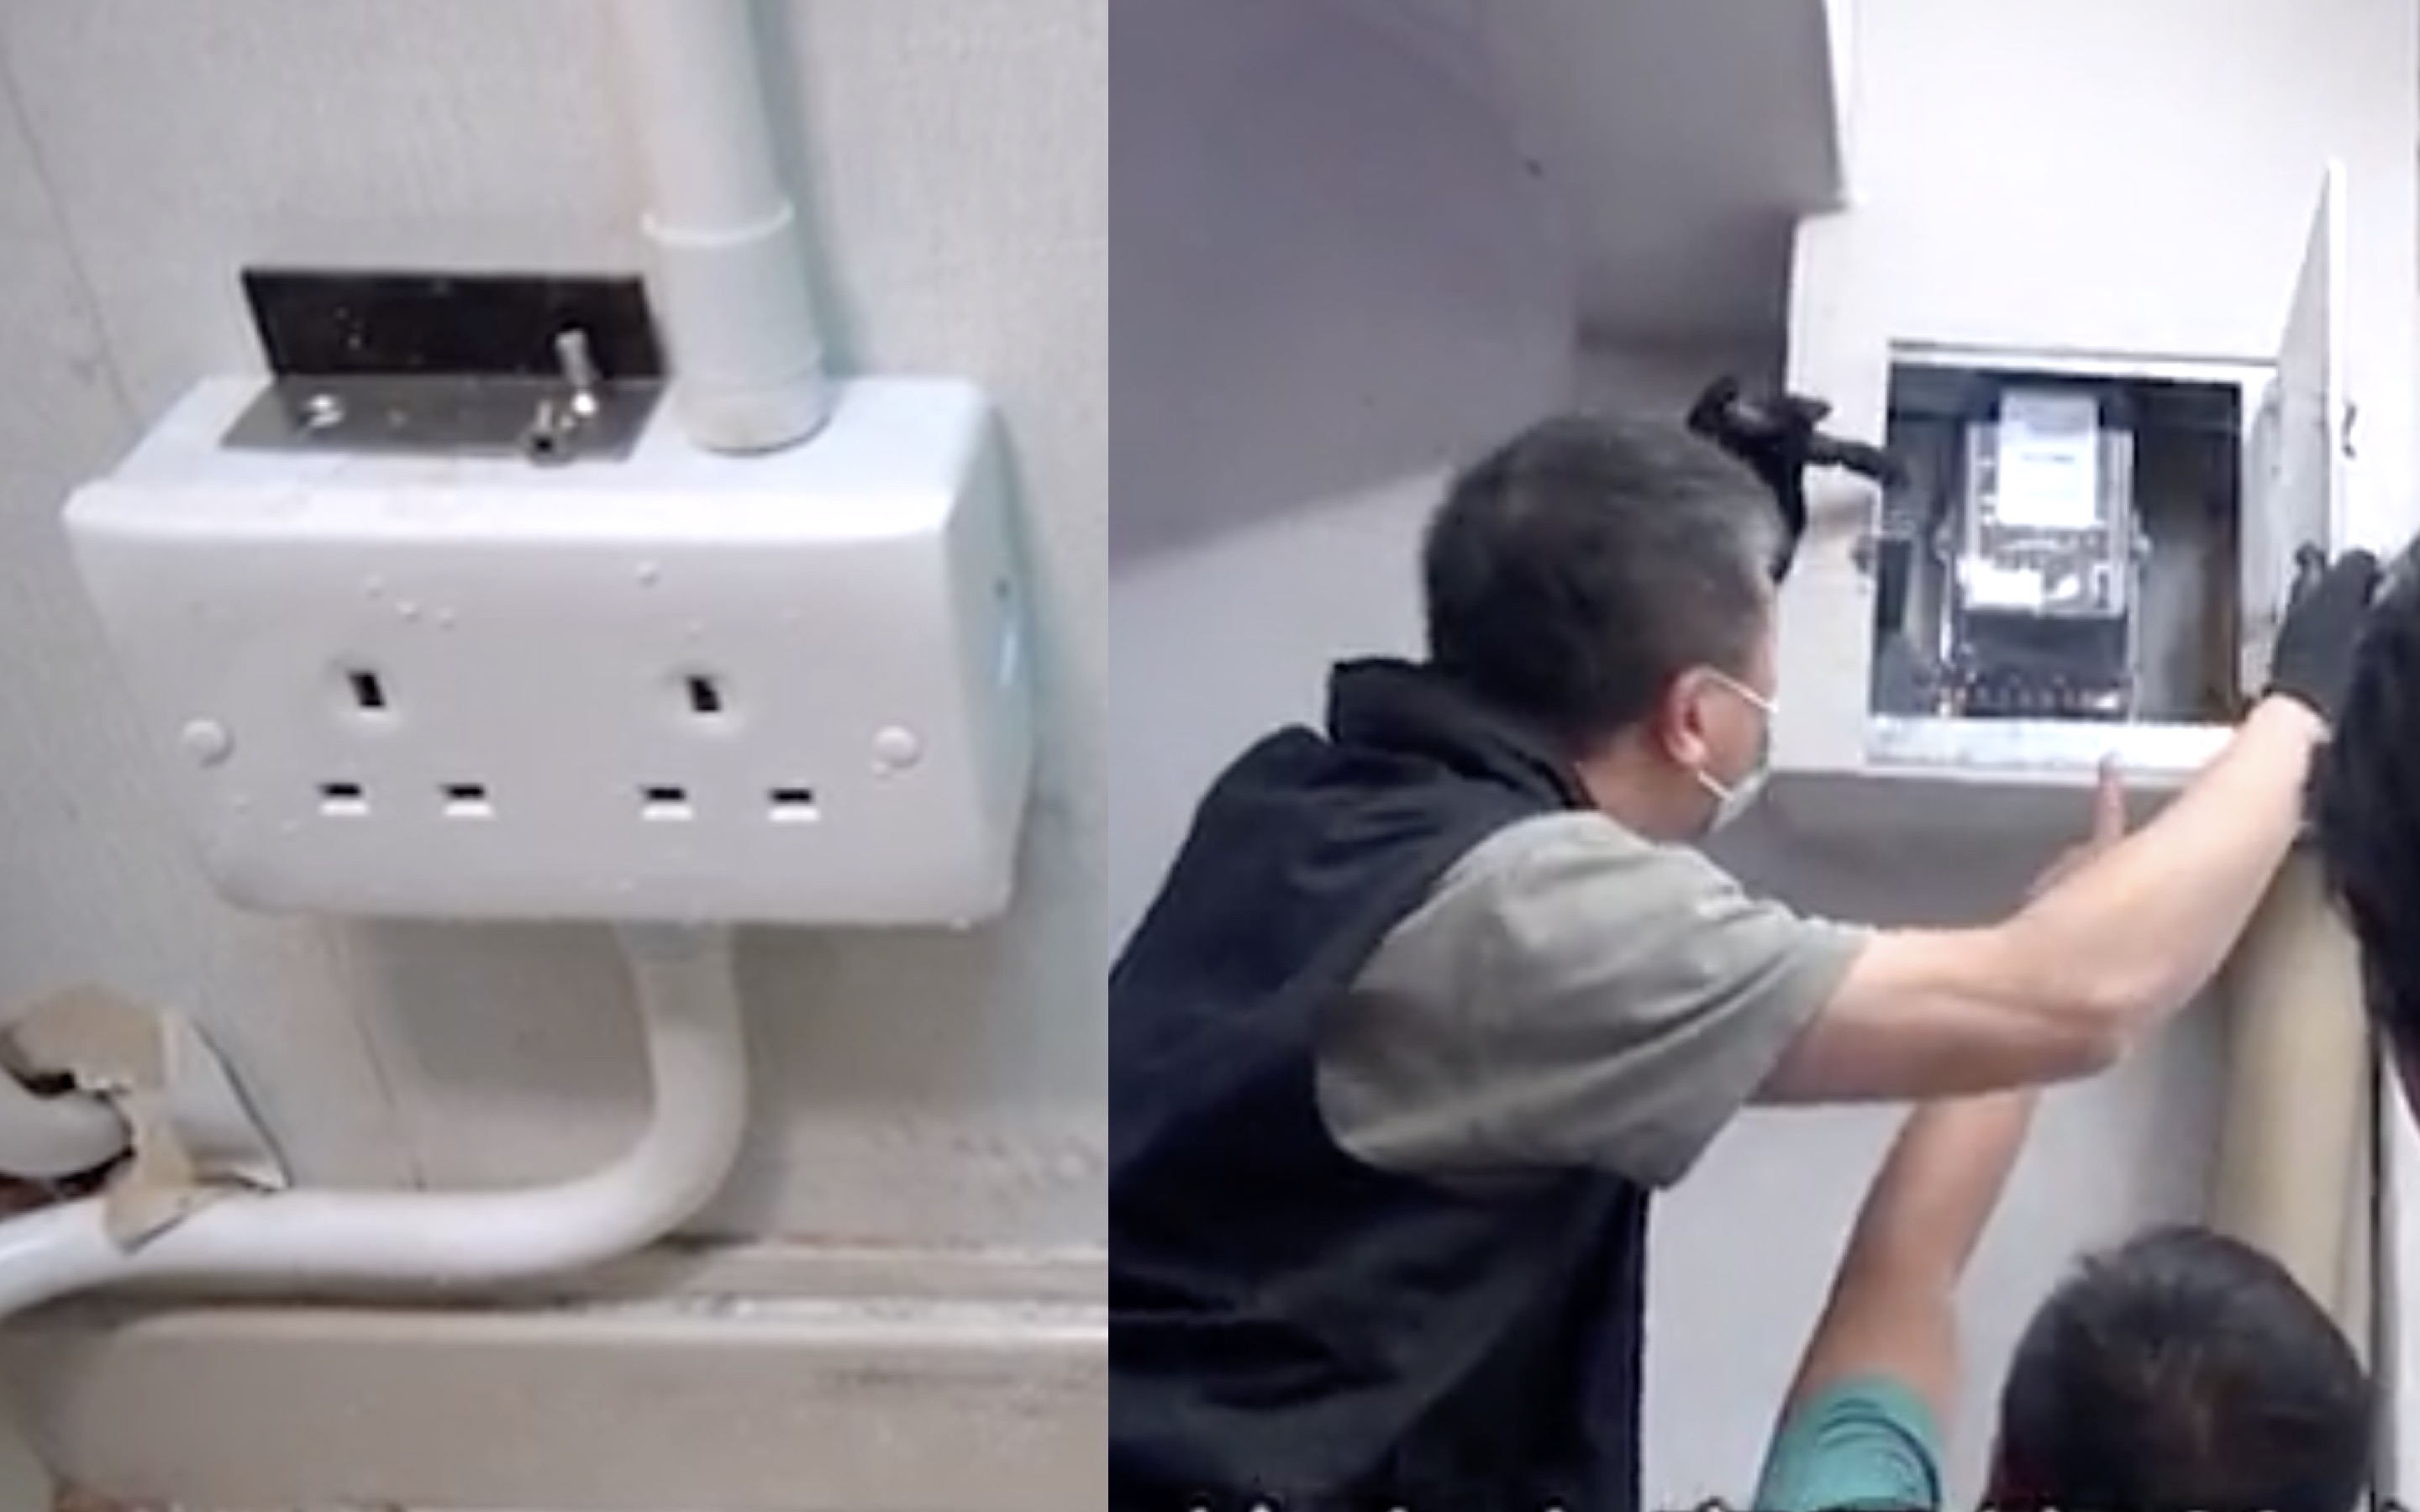 Police arrive at the site of the June 4 Museum ahead of its opening after vandals broke in and poured salt water on the electrical sockets and damaged furniture. Screengrabs via Apple Daily video.